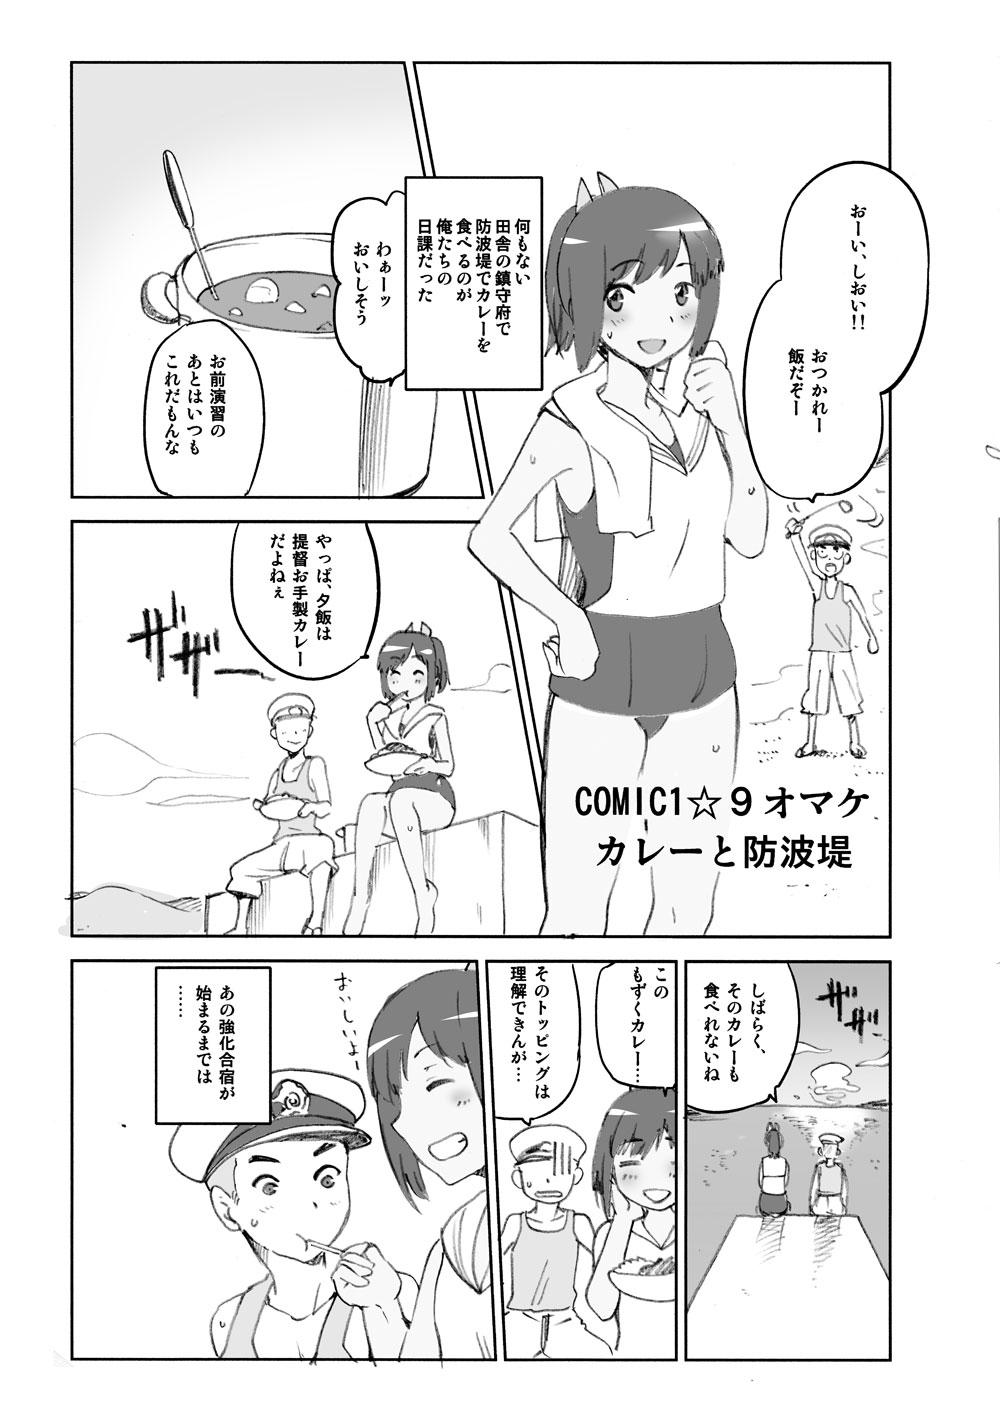 COMIC1☆9 Omake - Curry to Bouhatei 1